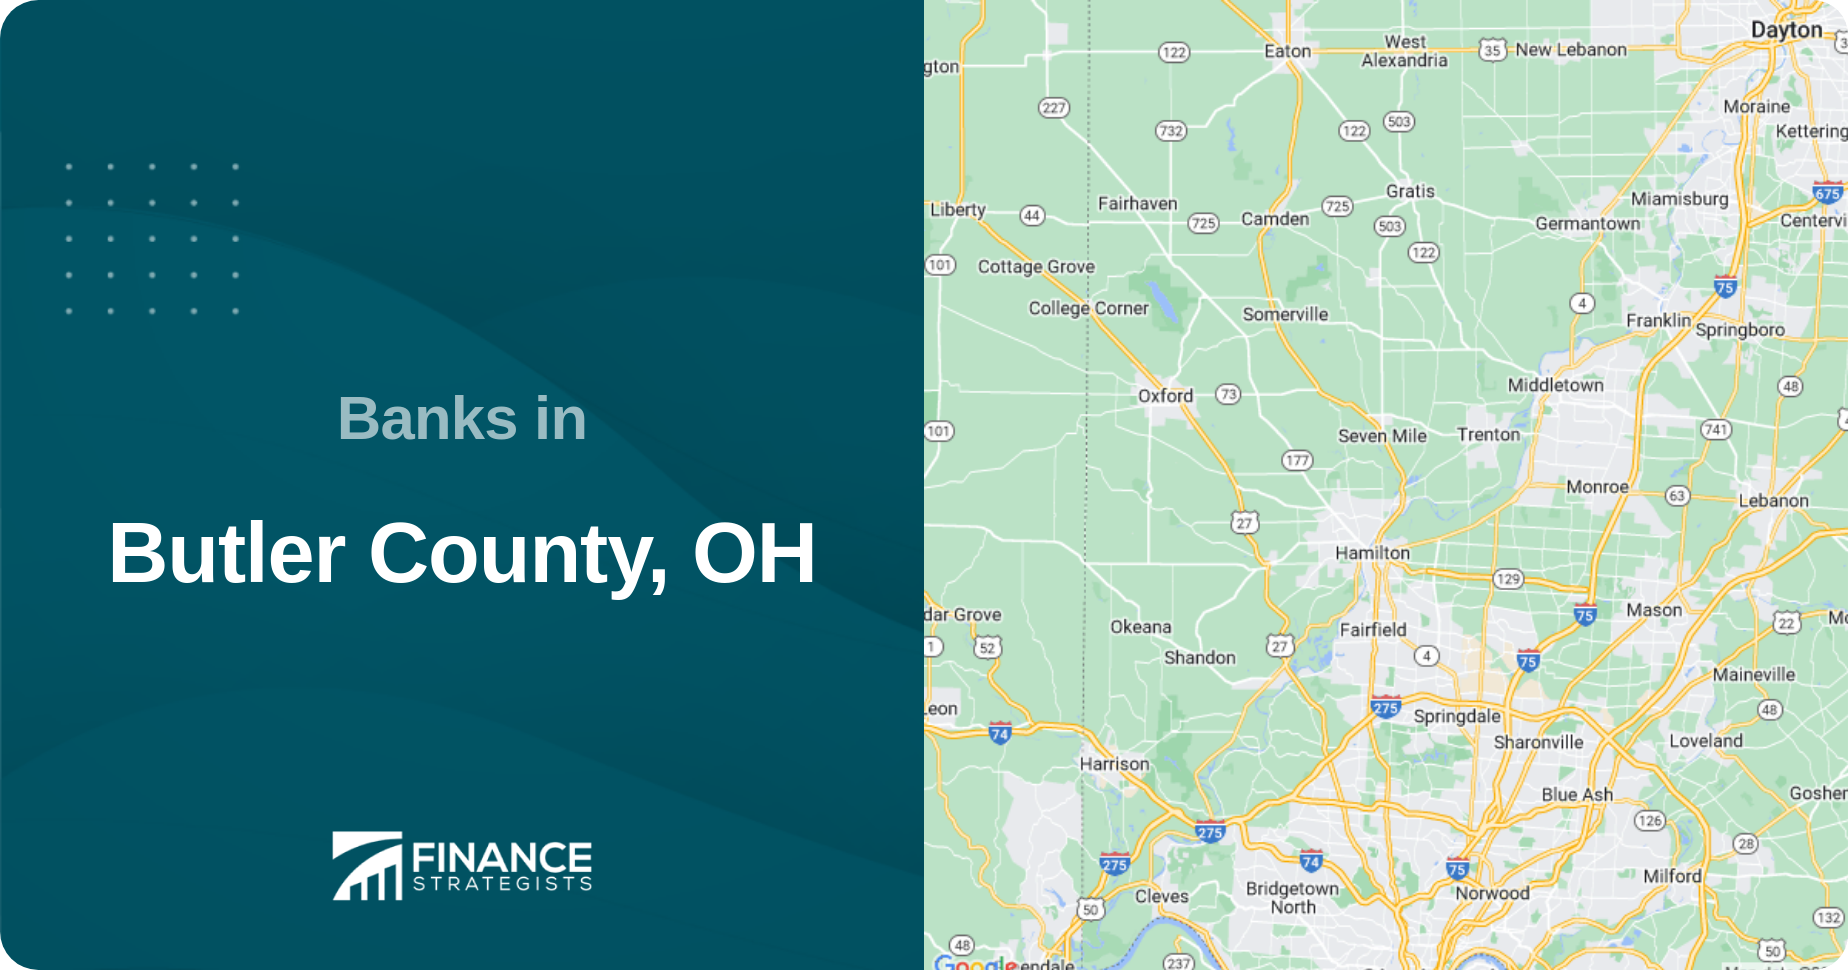 Banks in Butler County, OH